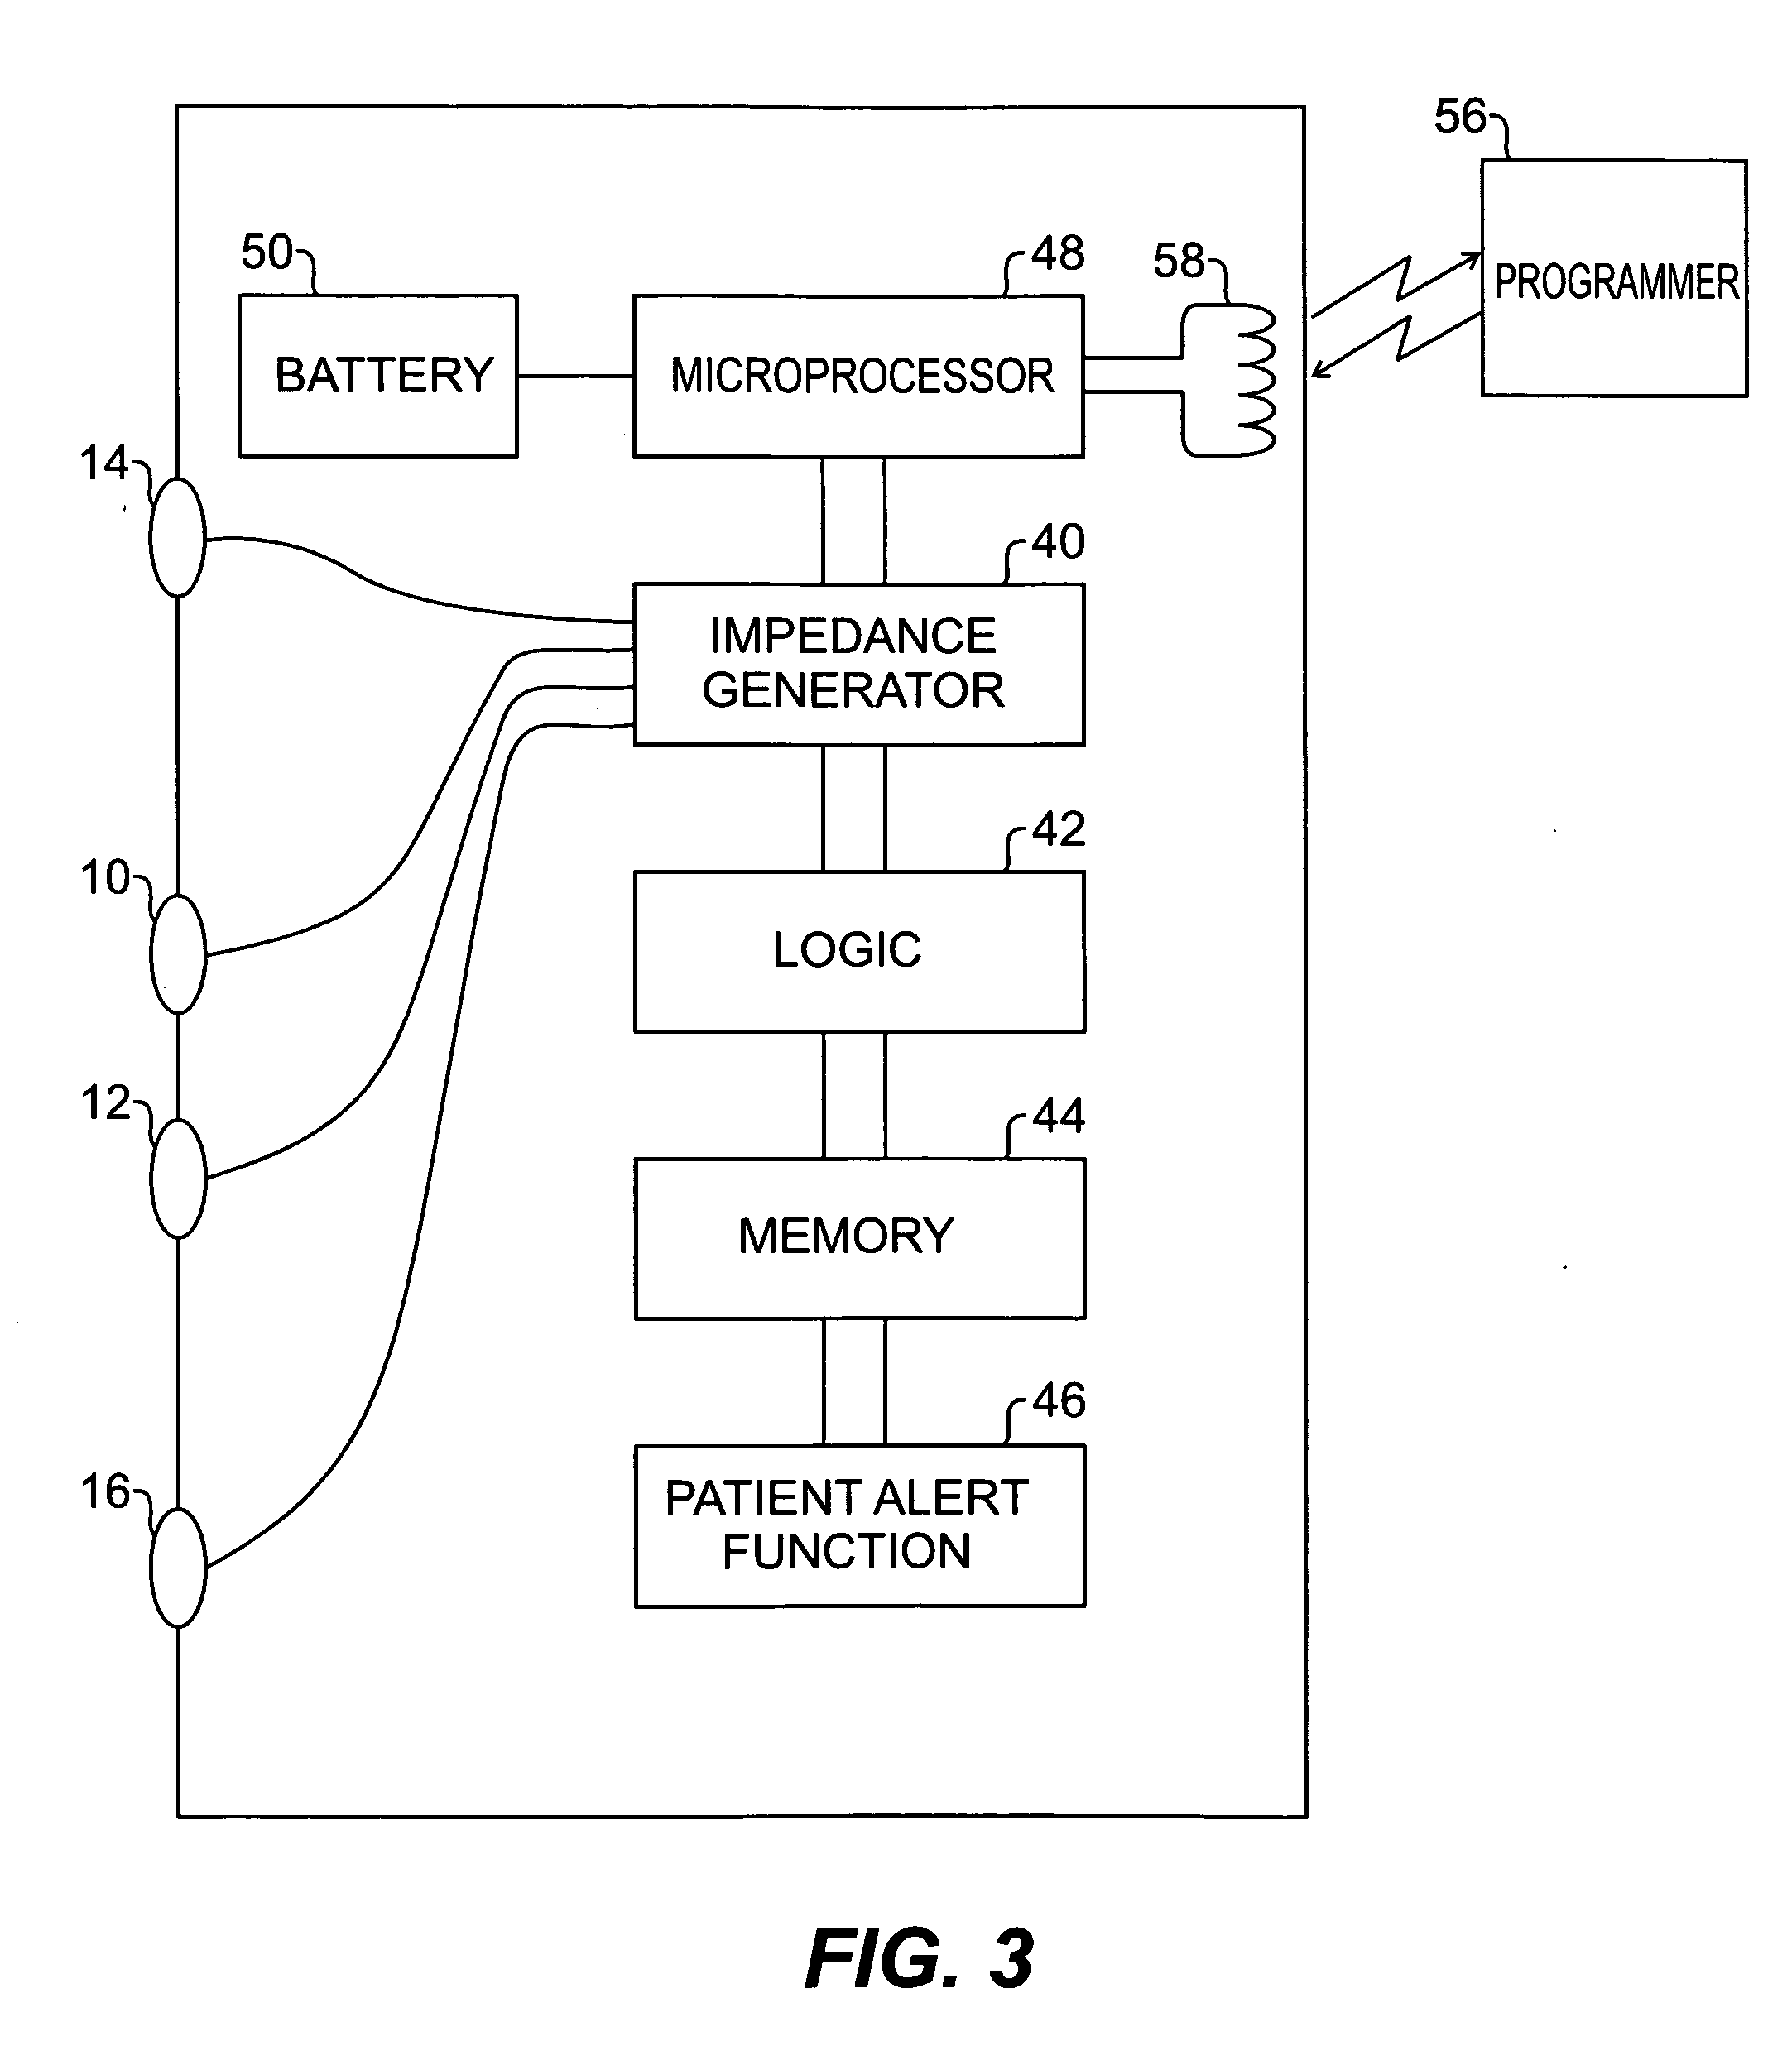 Remote control of implantable device through medical implant communication service band